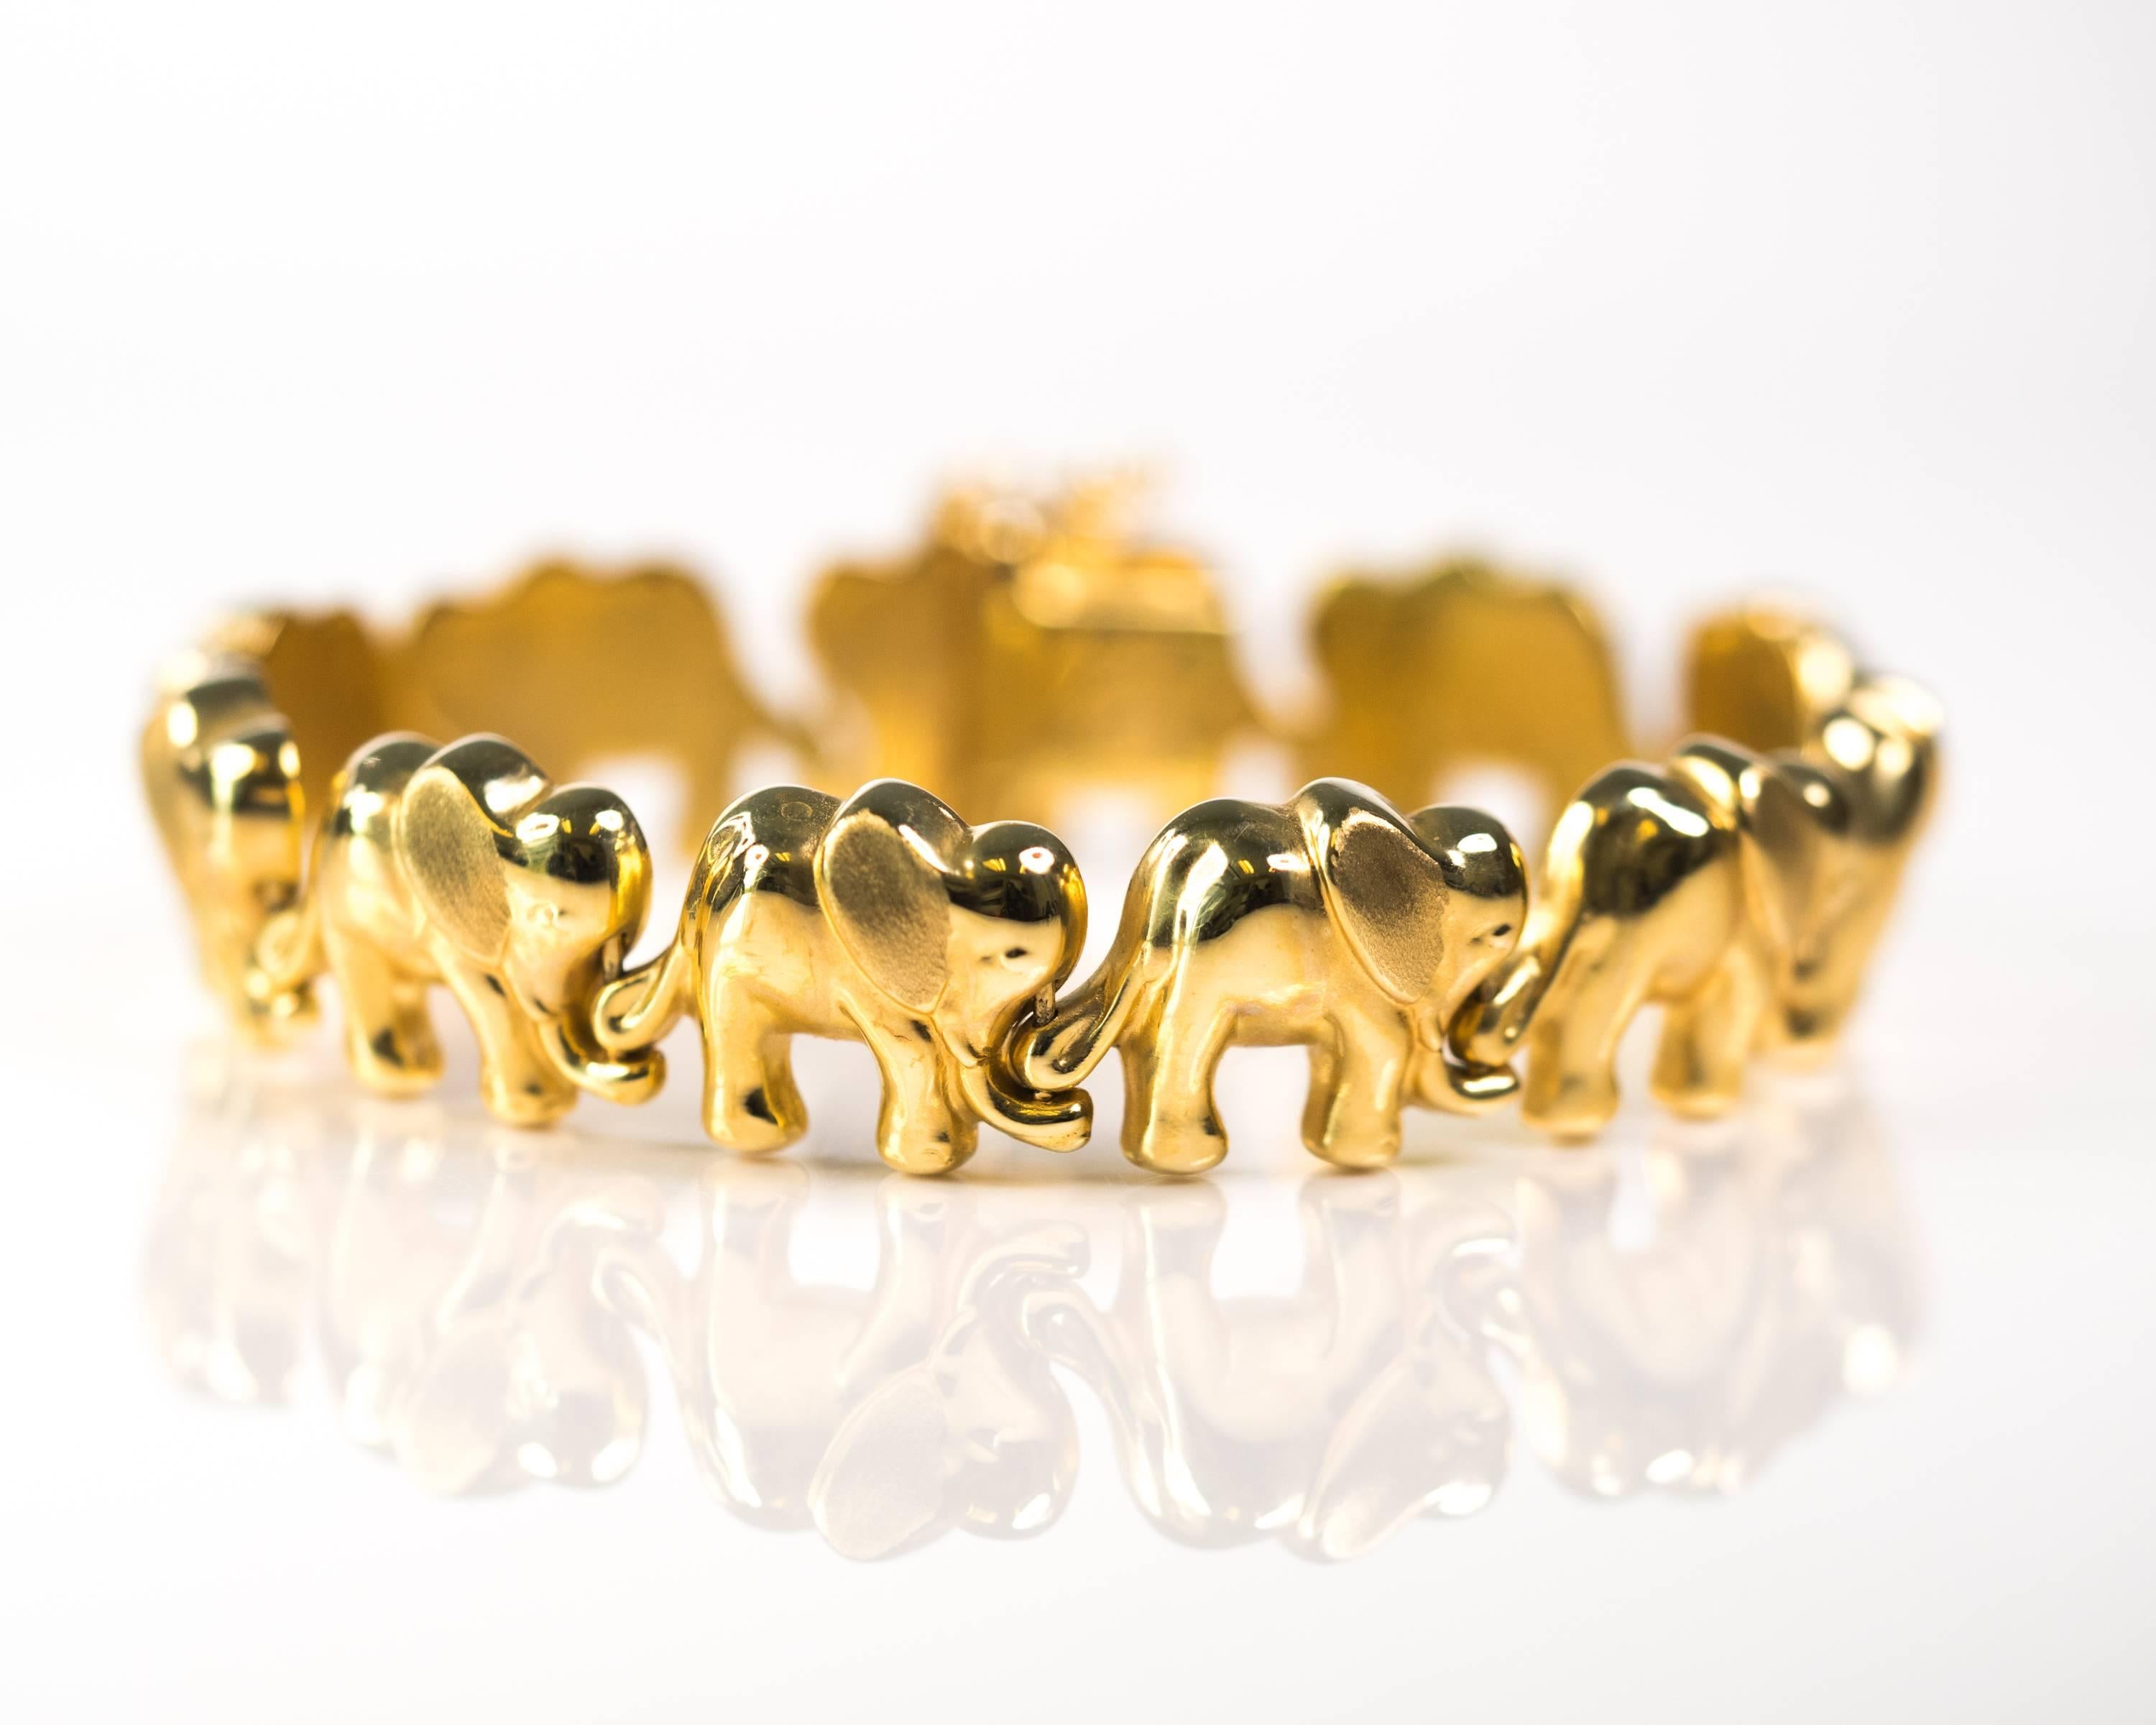 1960s Walking Elephant Bracelet - 14 Karat Yellow Gold

Features 11 Elephants walking Trunk to Tail.
The elephants are crafted from high polish 14 Karat Yellow Gold with matte finish ears. The contrast adds dimension and interest to the bracelet.